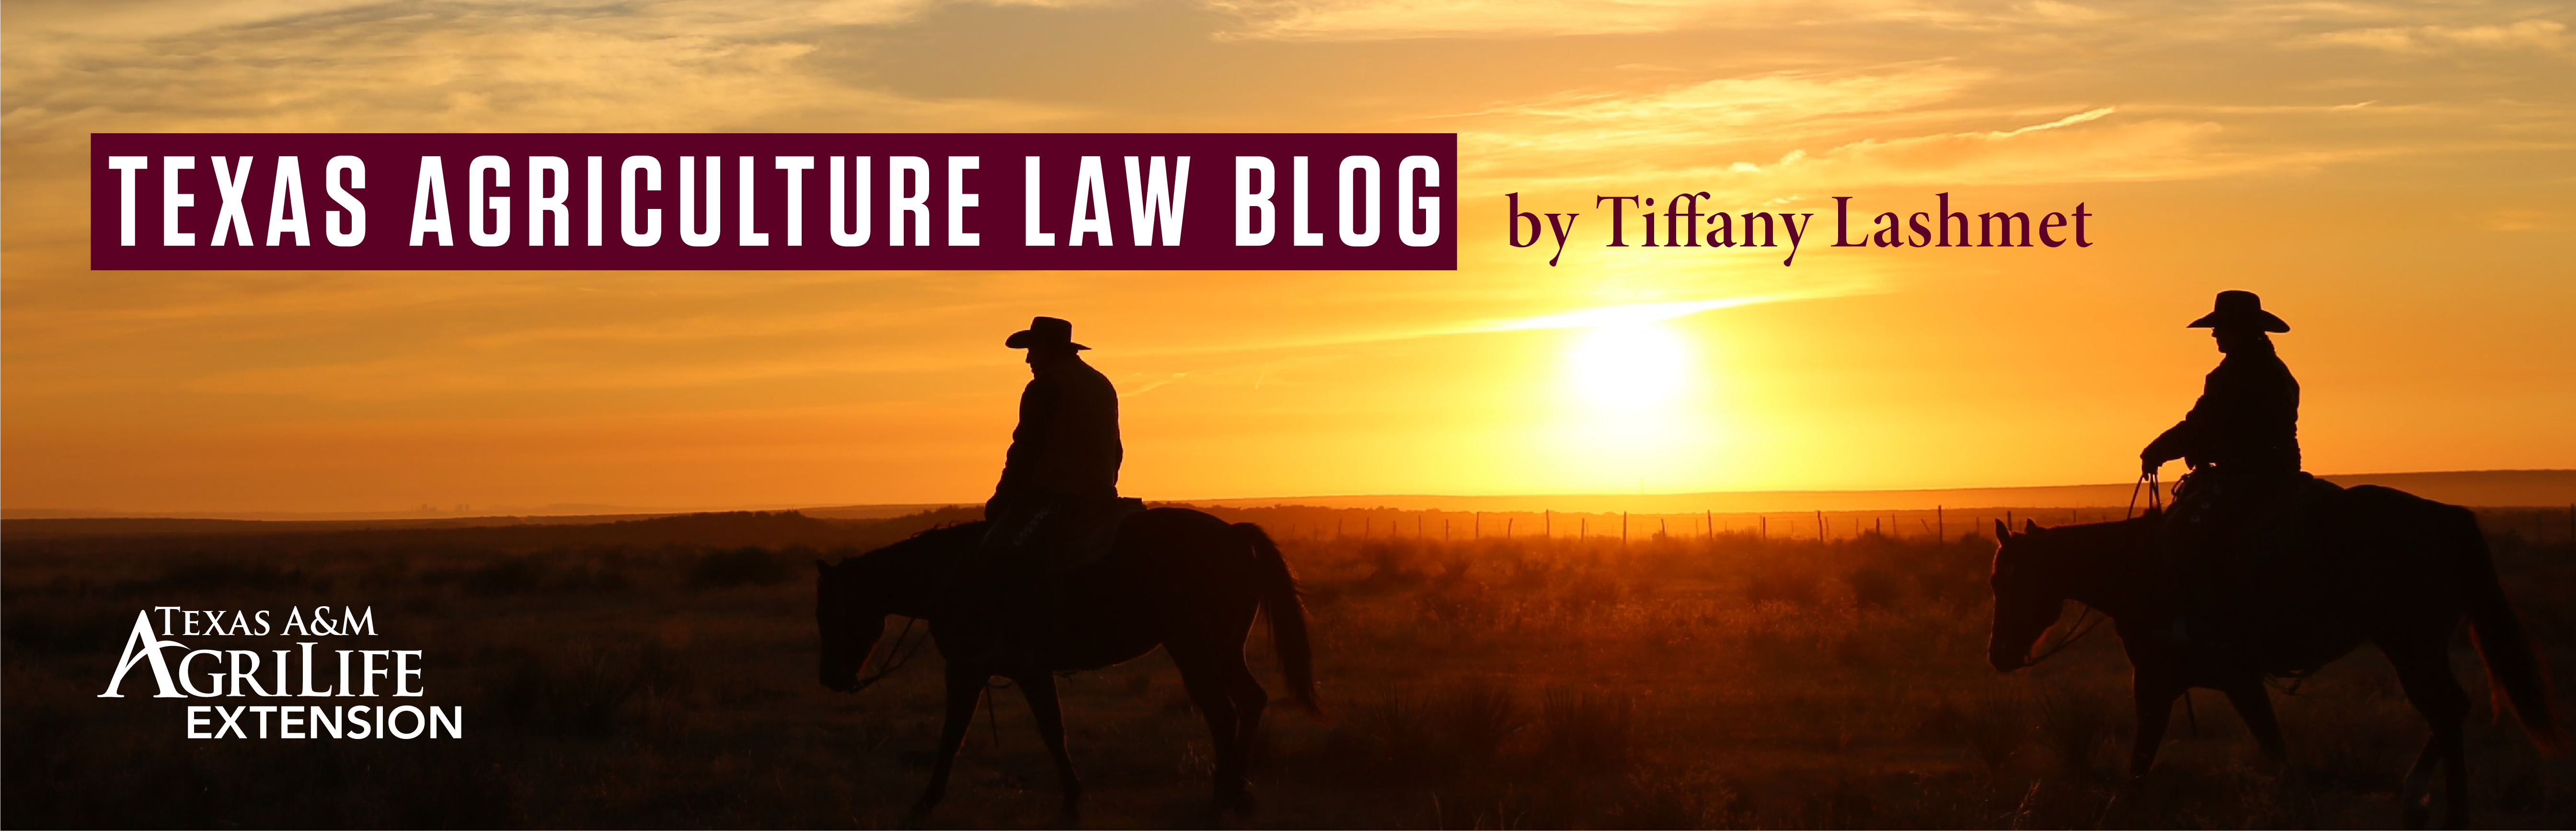 Texas Agriculure Law Blog Banner